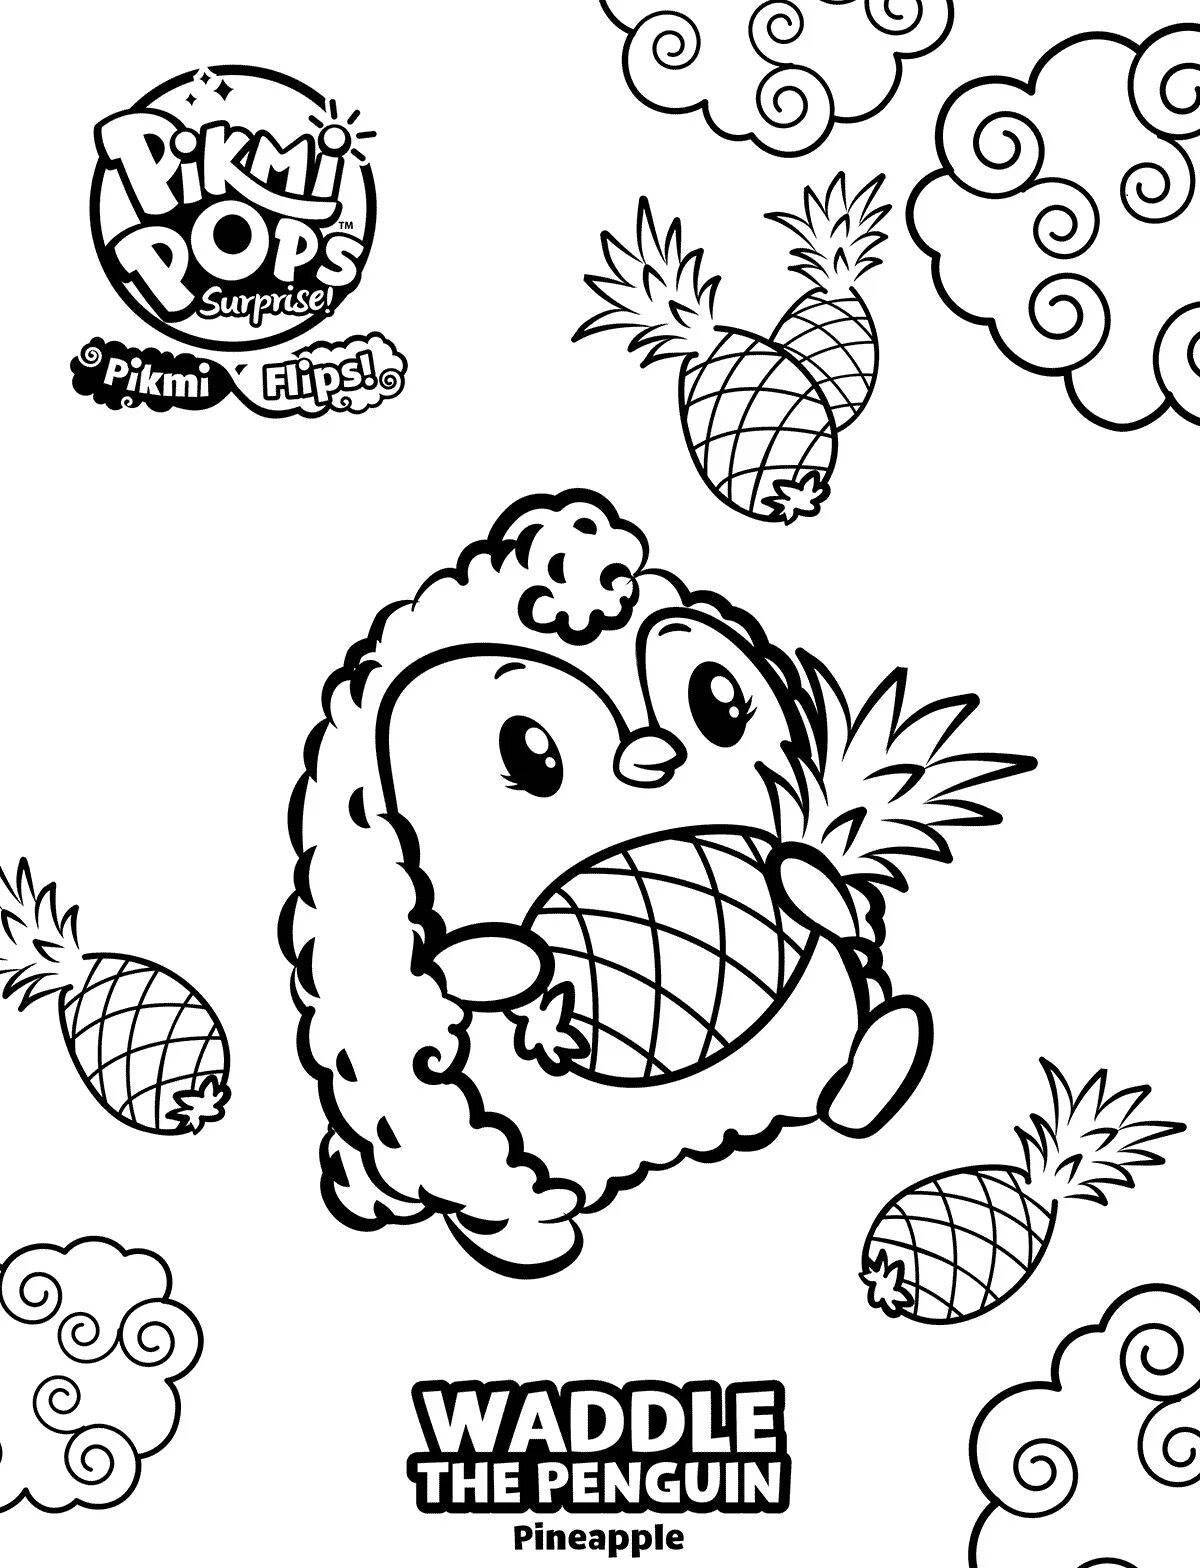 Coloring page nice picky pops